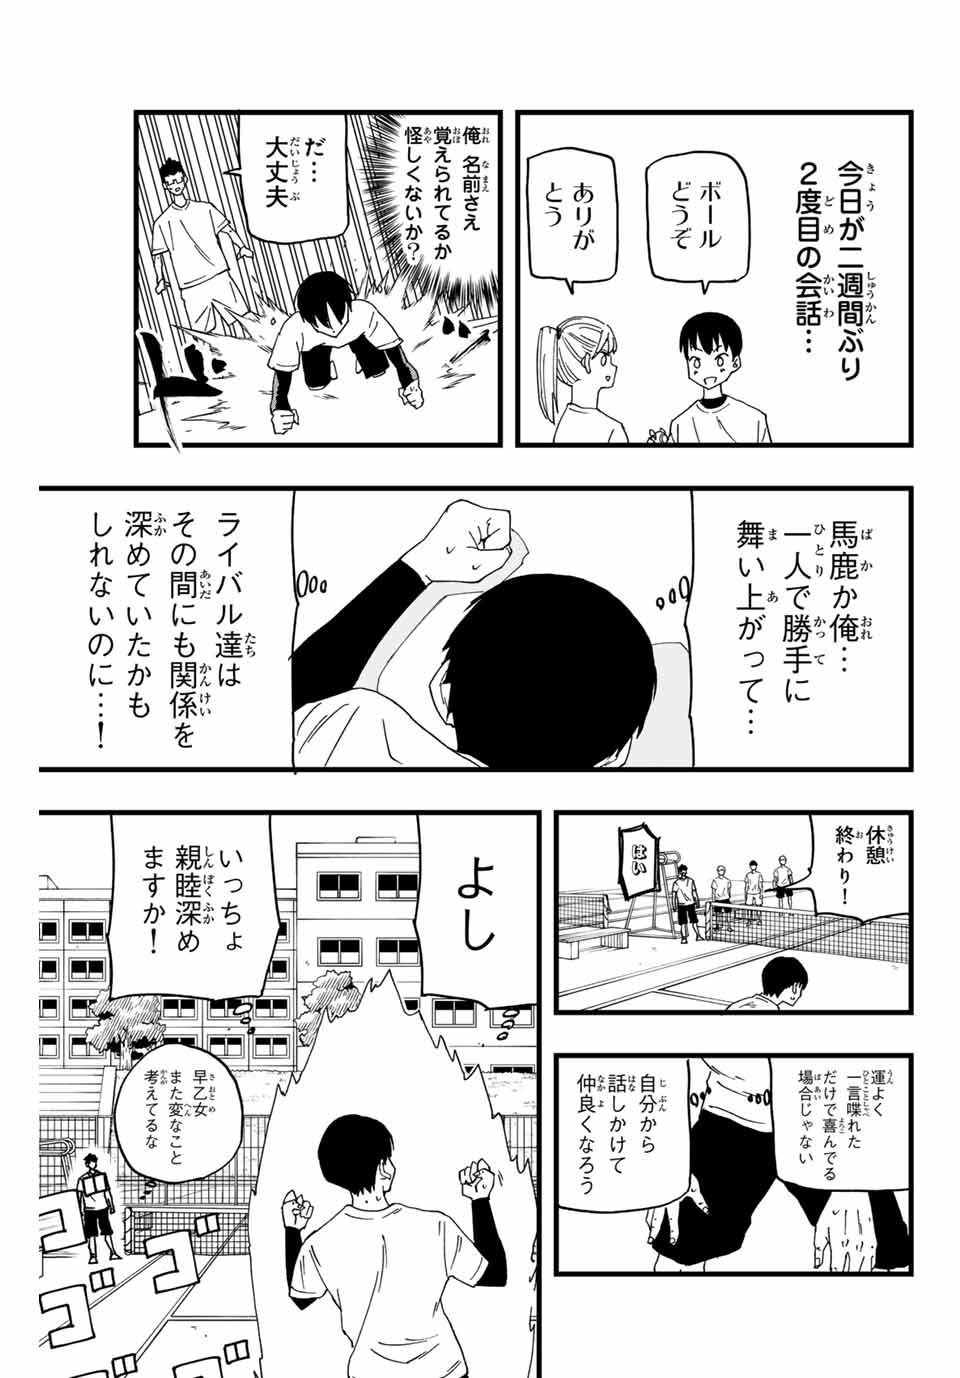 LoVE GAME 第2話 - Page 17